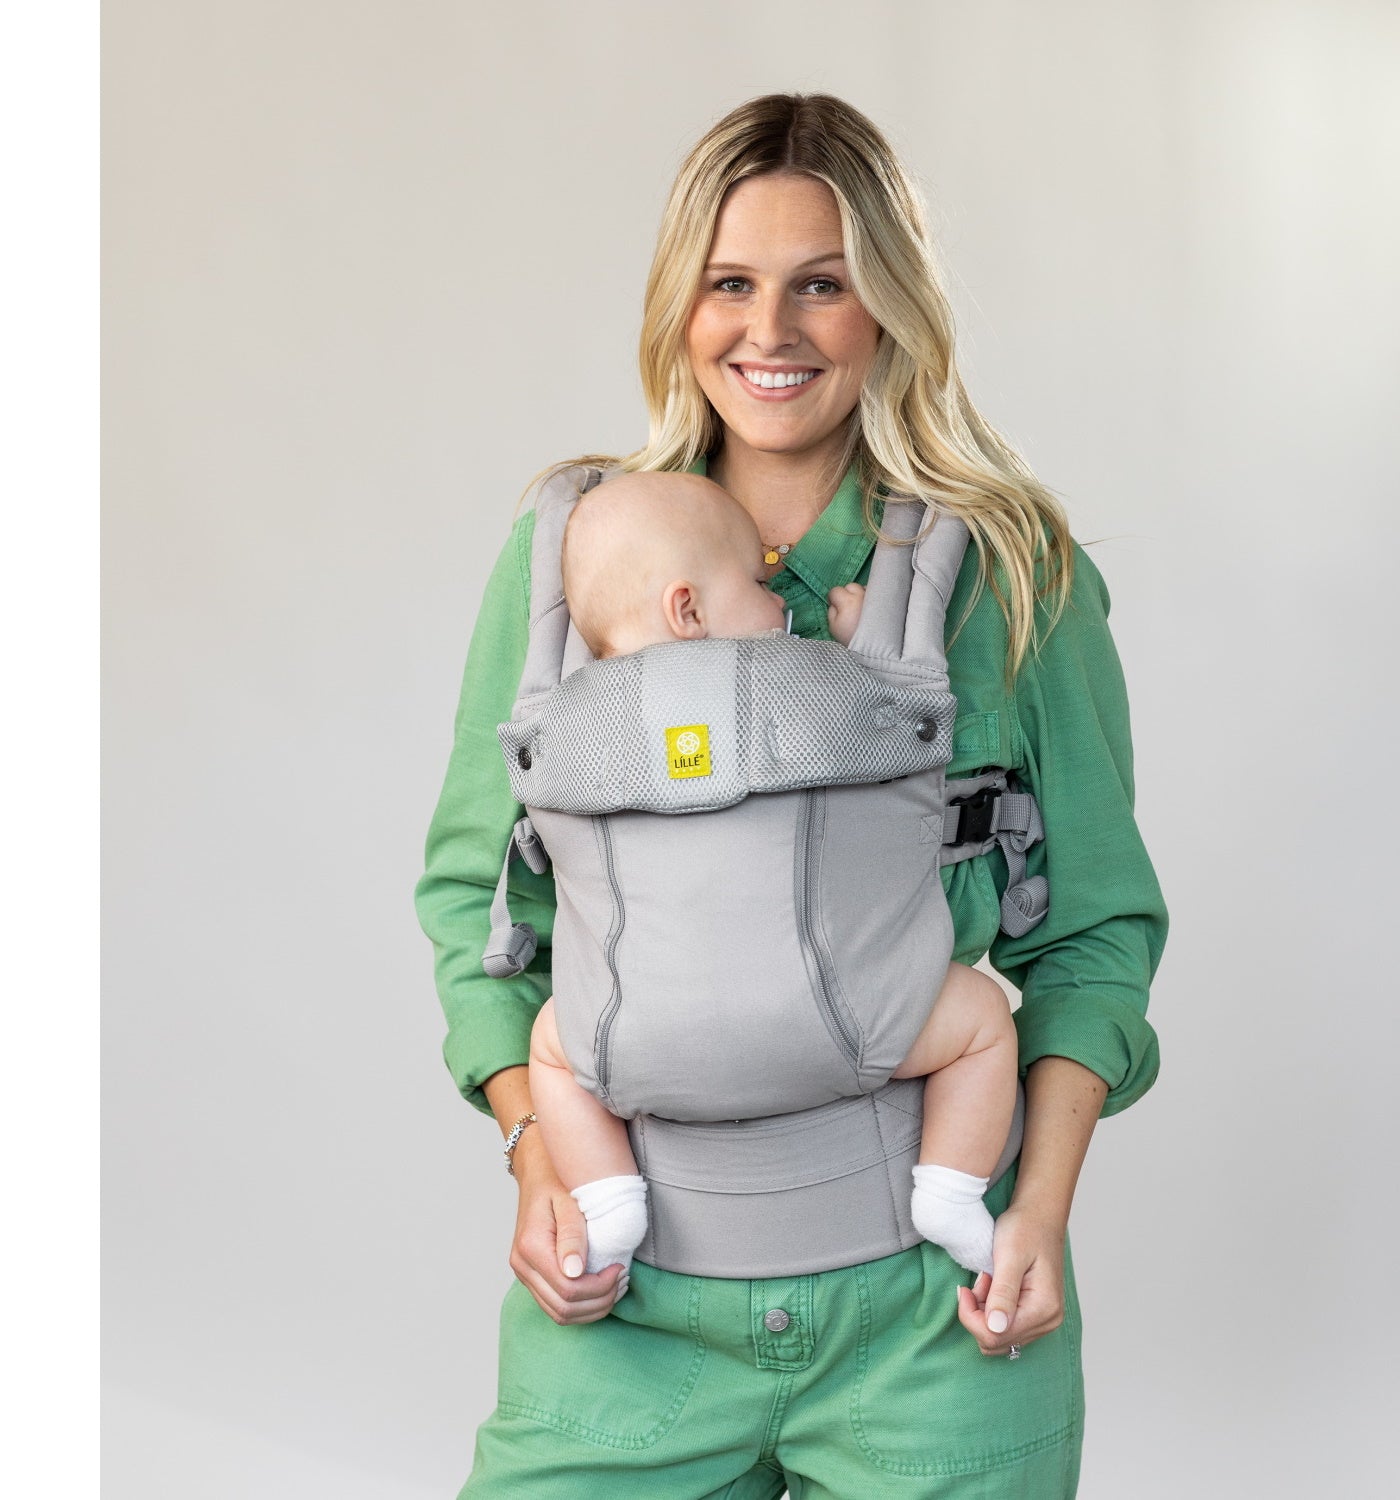 Mum and baby in the LILLEbaby carrier, front inward-facing position. The Babywearing Series. Belly Beyond.